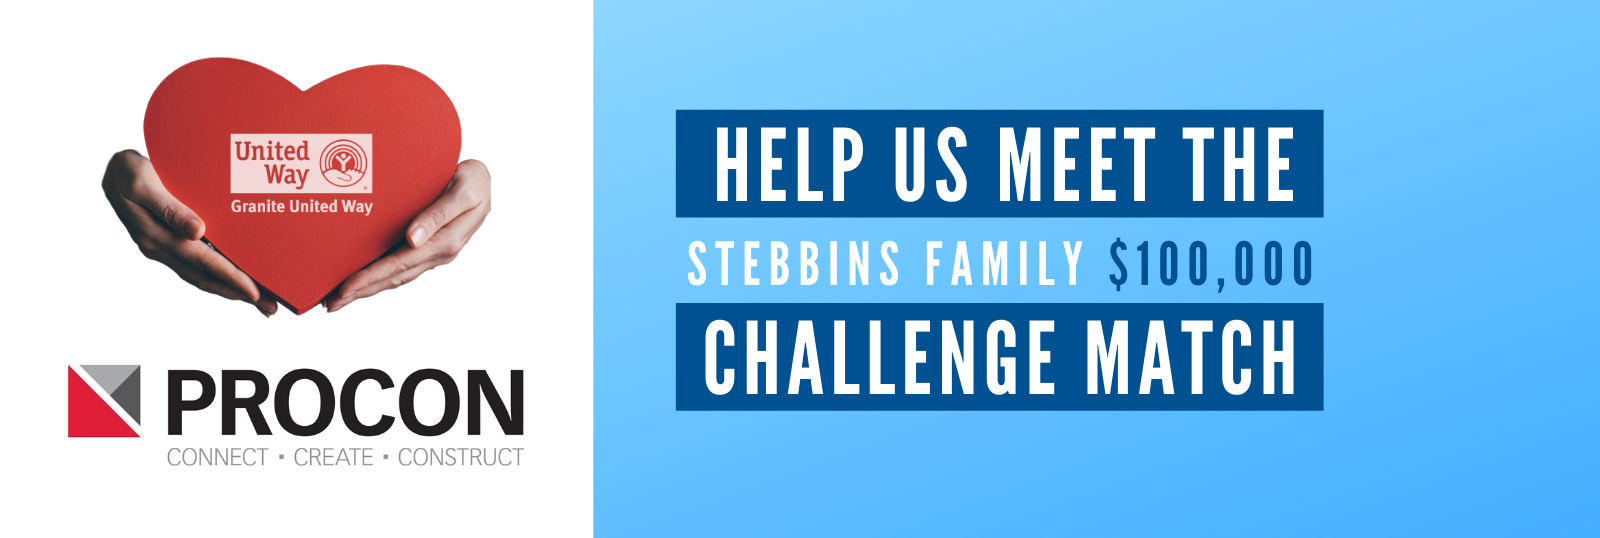 What Can We Do to Help? Stebbins Family Partnering with Granite United Way During COVID-19